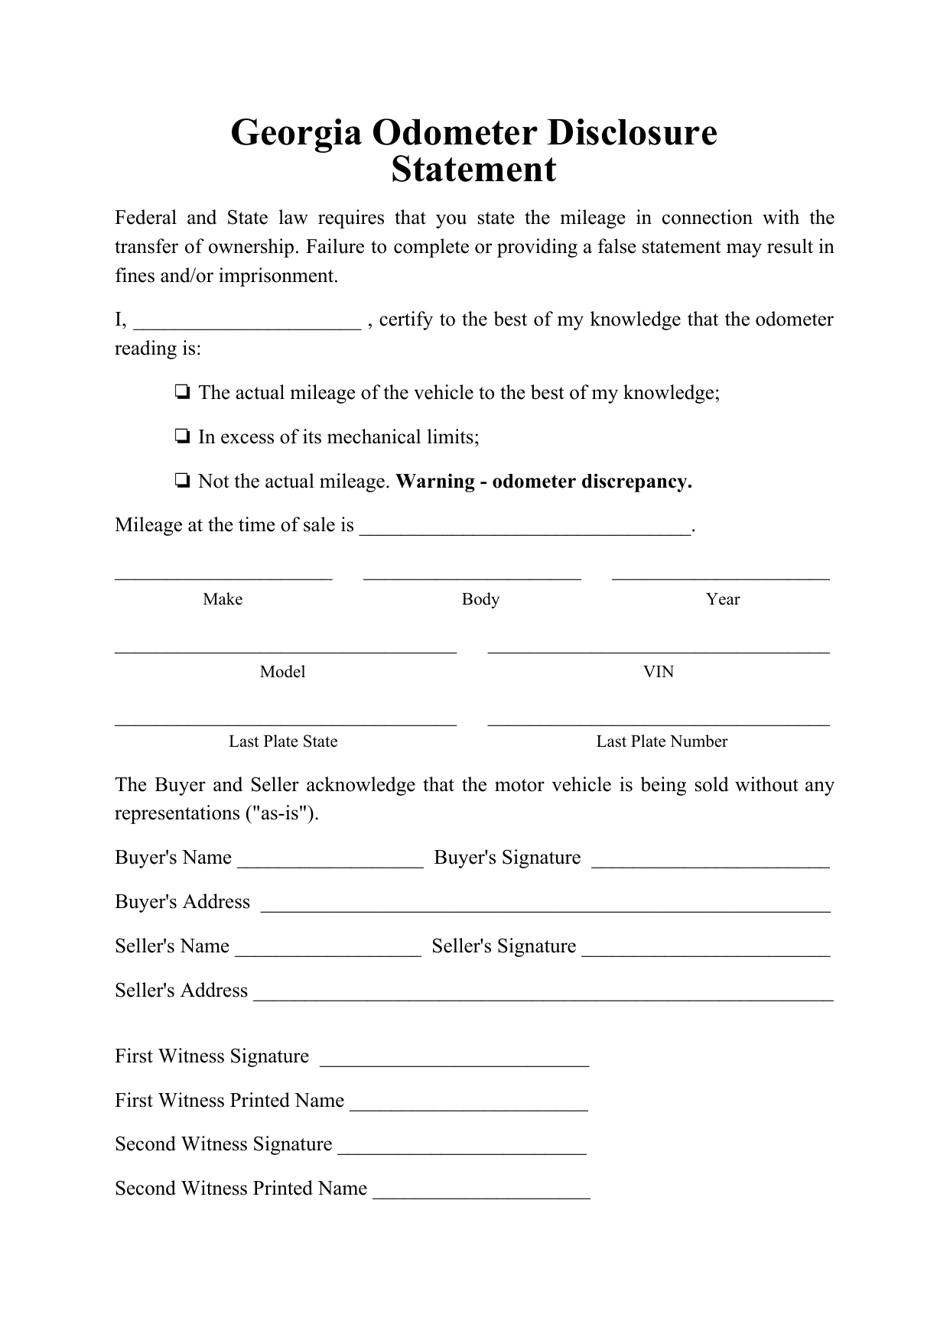 Odometer Disclosure Statement Form - Georgia (United States), Page 1